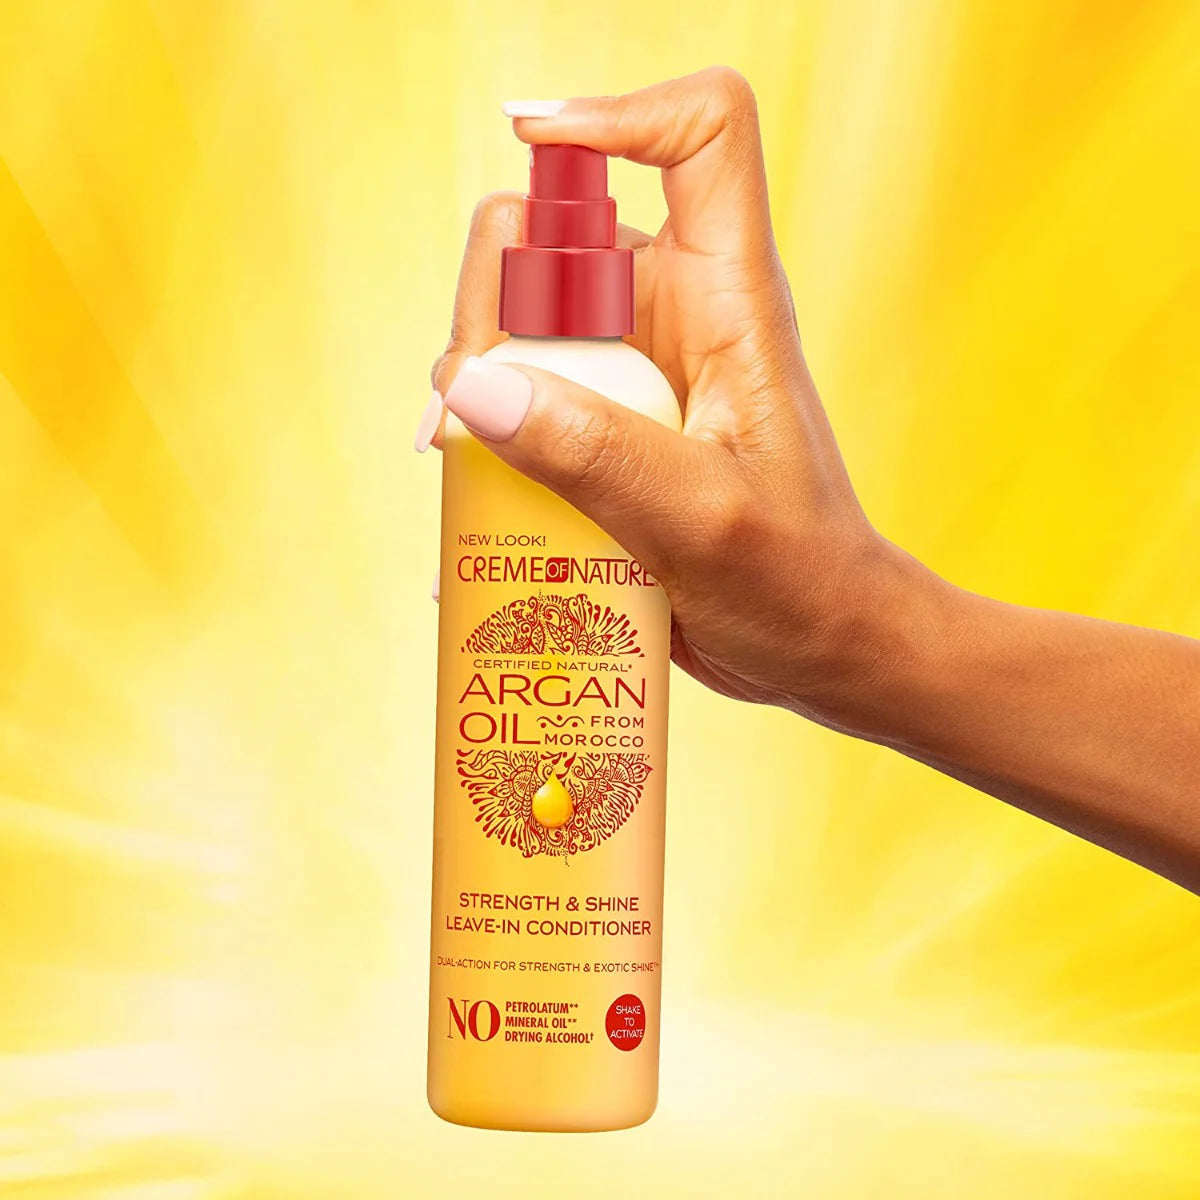 Strength & Shine Leave-In Conditioner